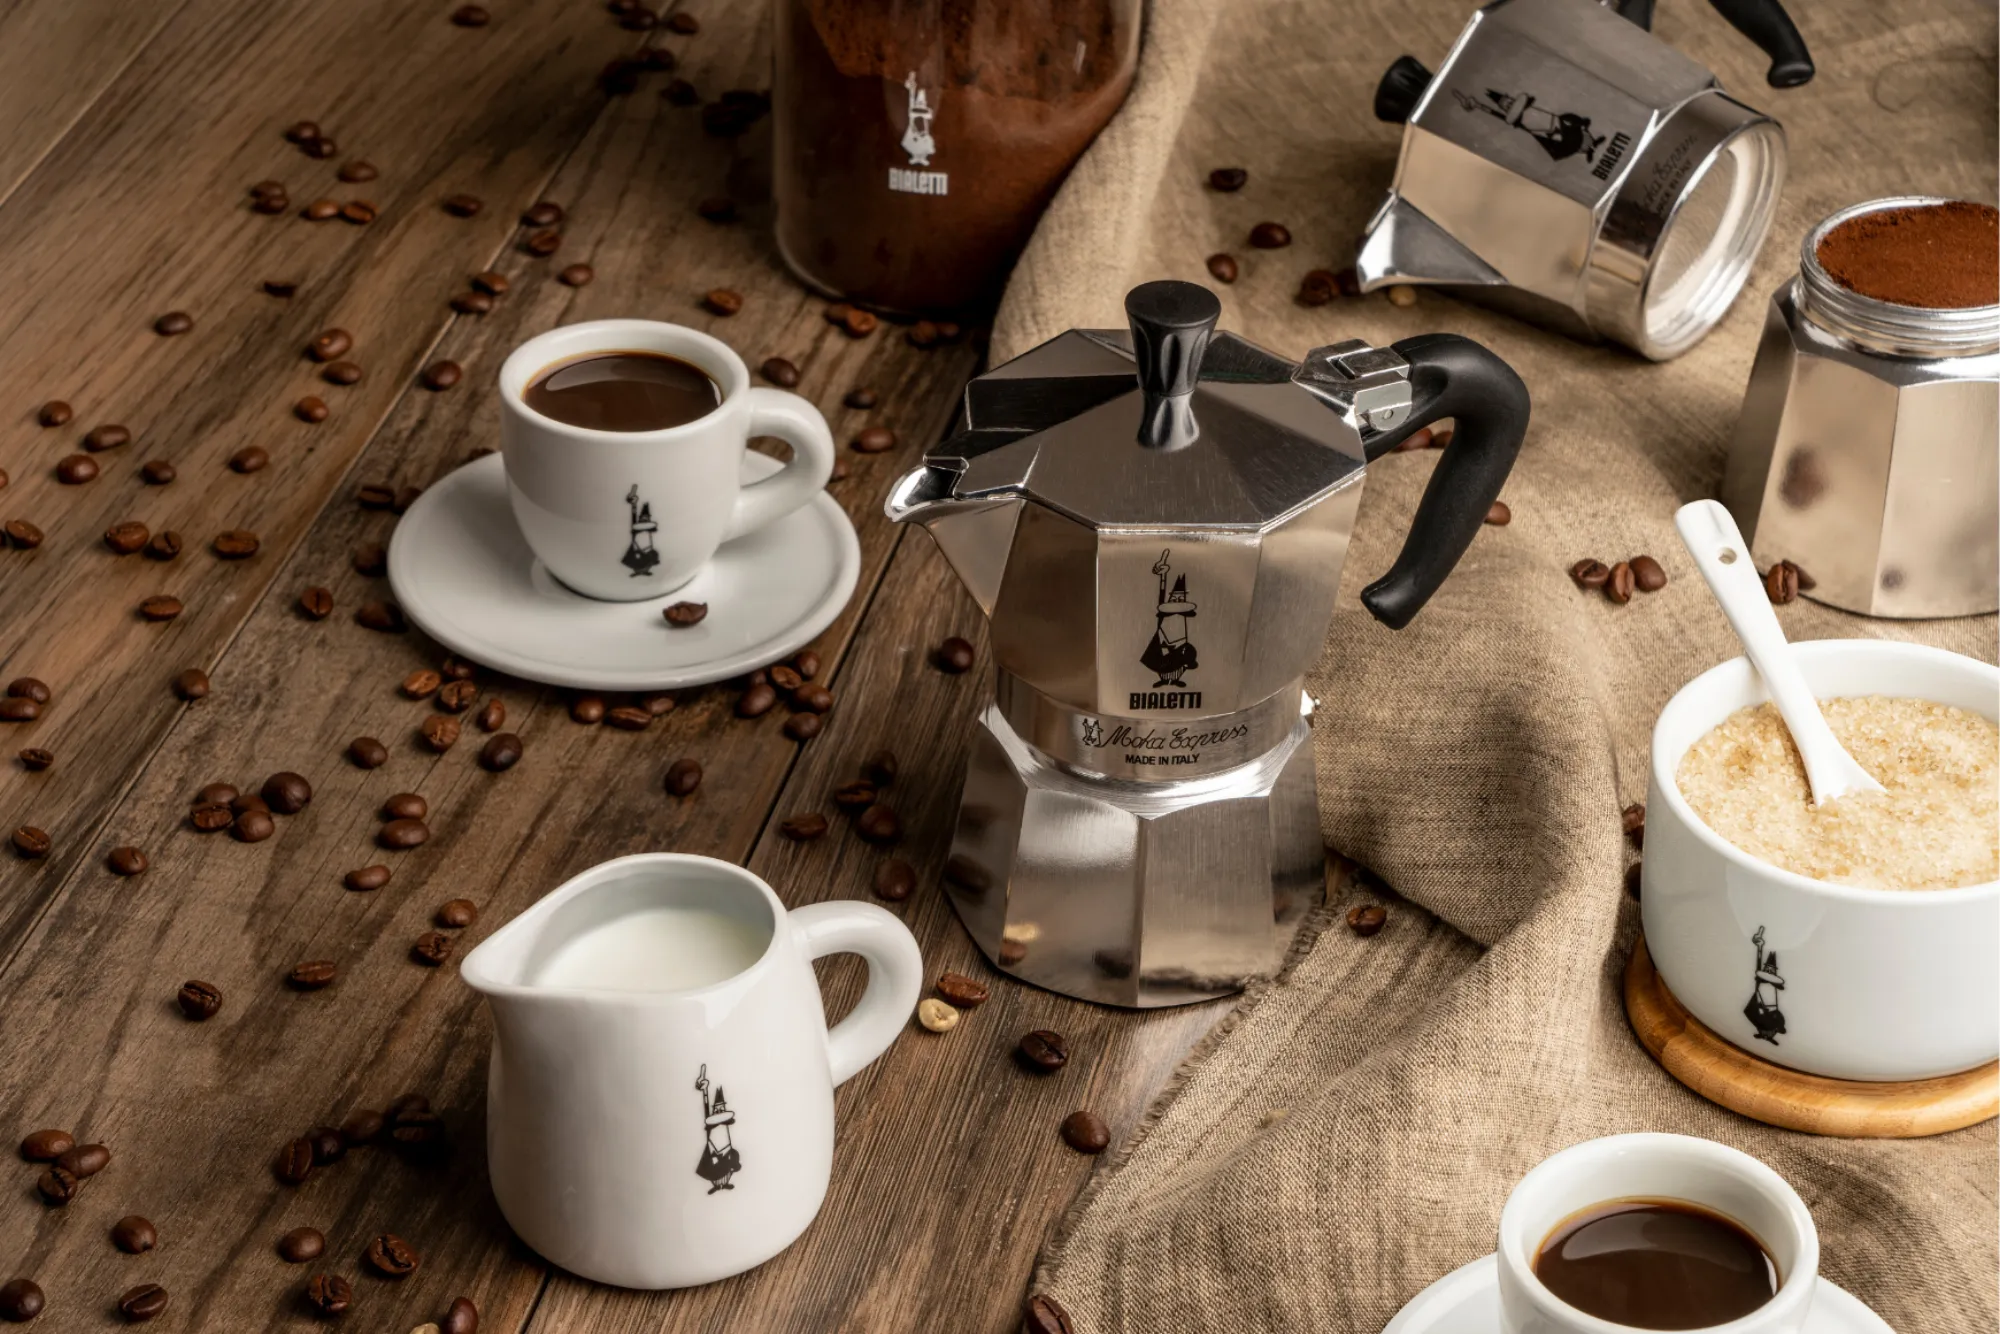 Bialetti Moka Express: Strong Coffee With Little Effort